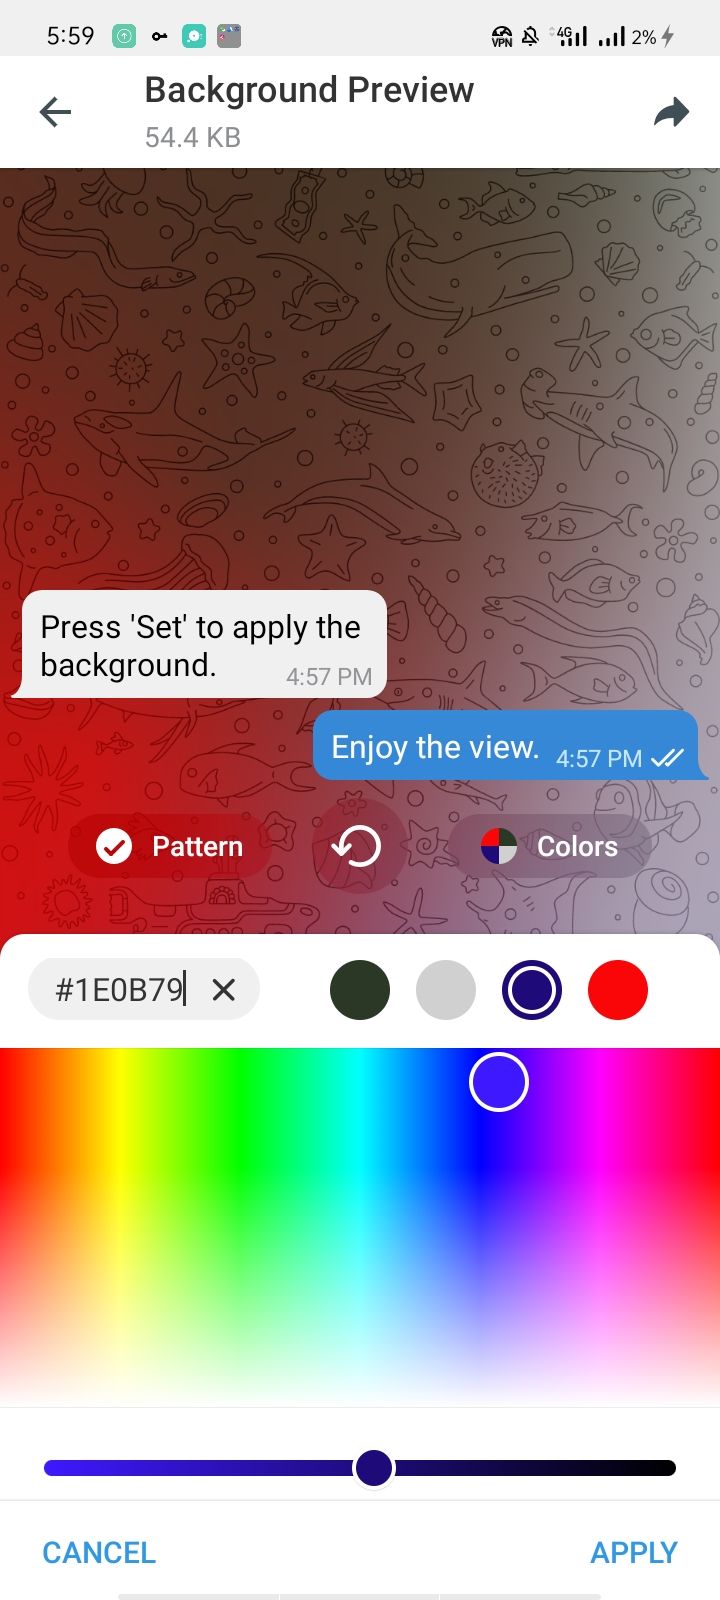 Changing Colors In Color Settings In Background Preview Screen In Telegram App